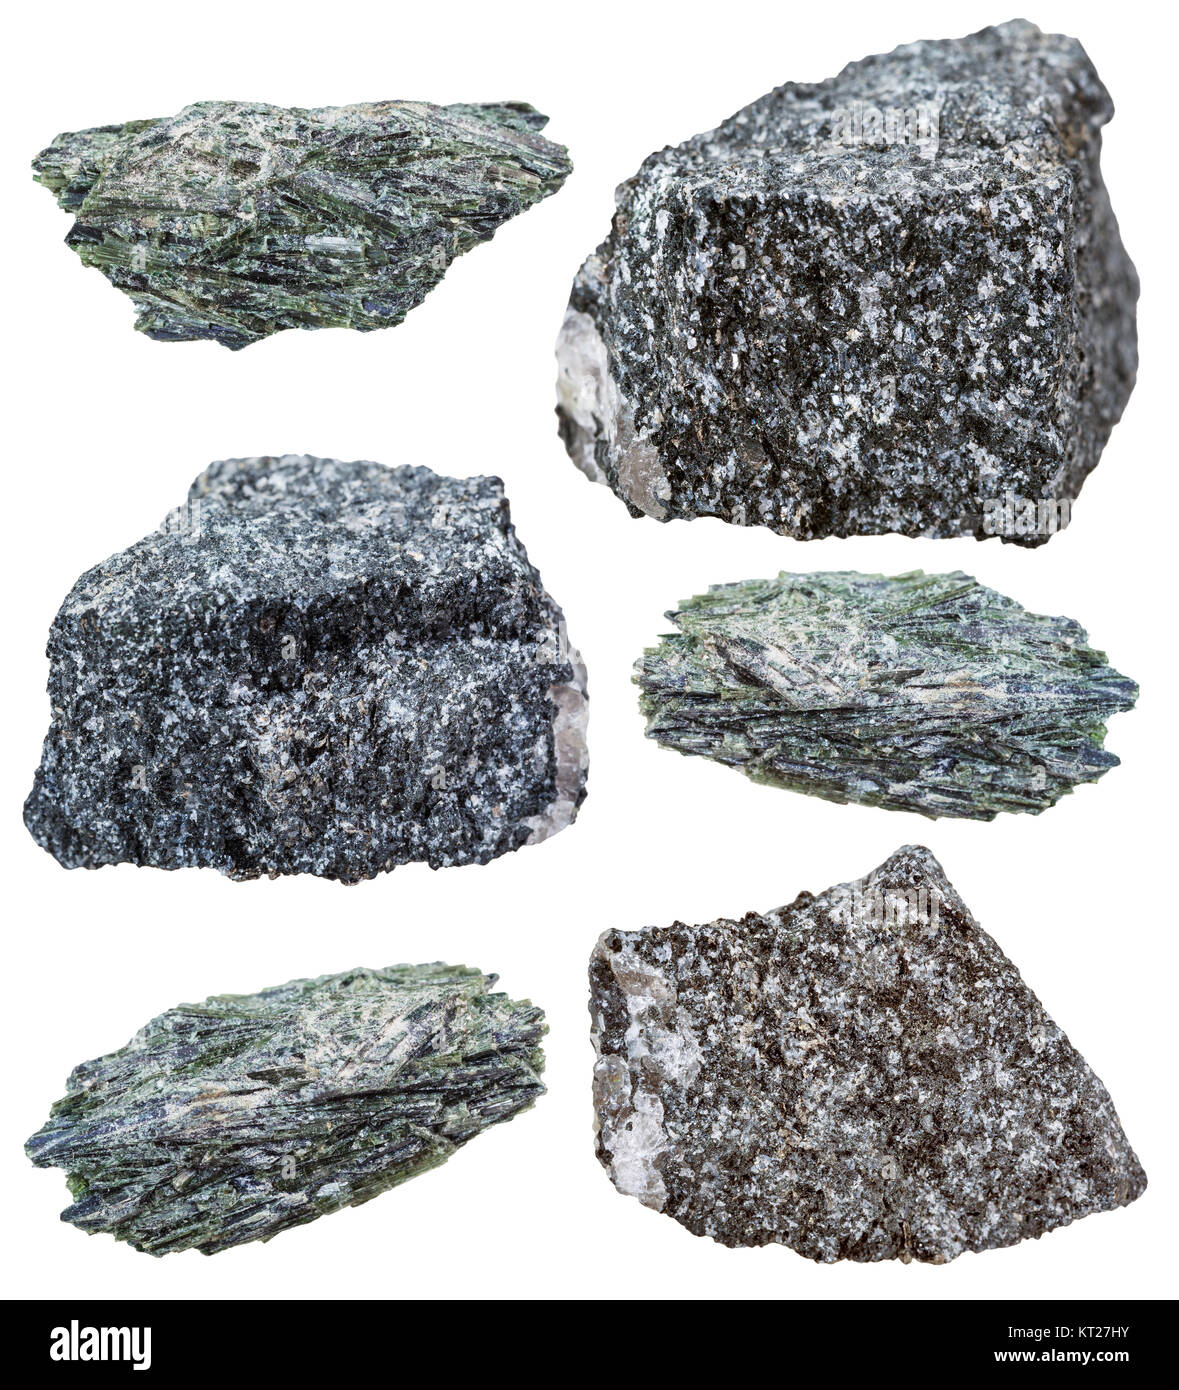 collection of various actinolite mineral stones Stock Photo